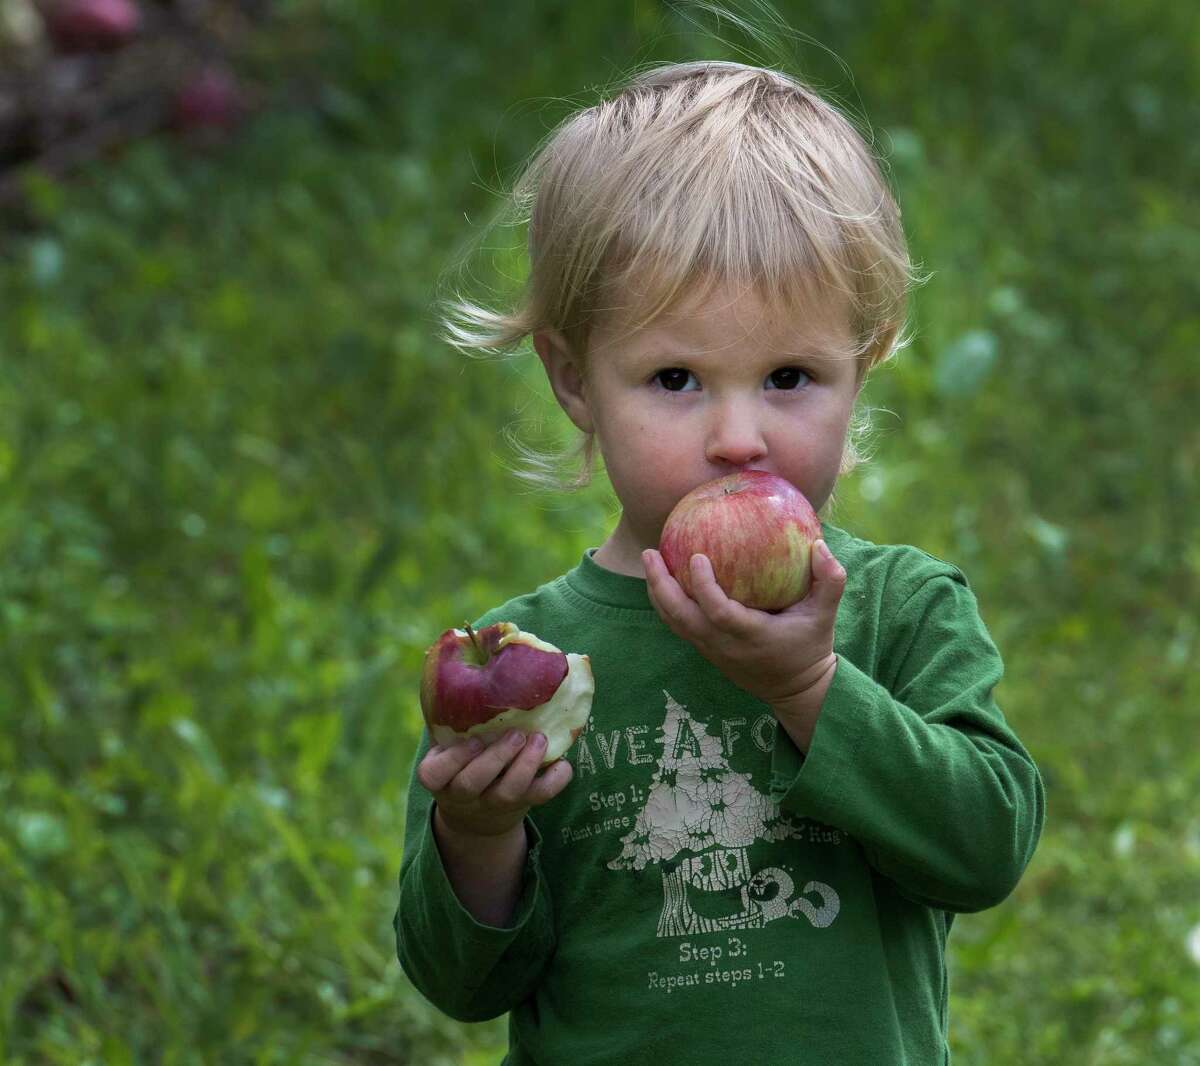 Nora Breen, 3, seems to be having a tough time figuring out which apple to eat first while apple picking with her family at the Indian Ladder Farms on Thursday, Sept. 7, 2017, in Altamont, N.Y. (Skip Dickstein/Times Union)